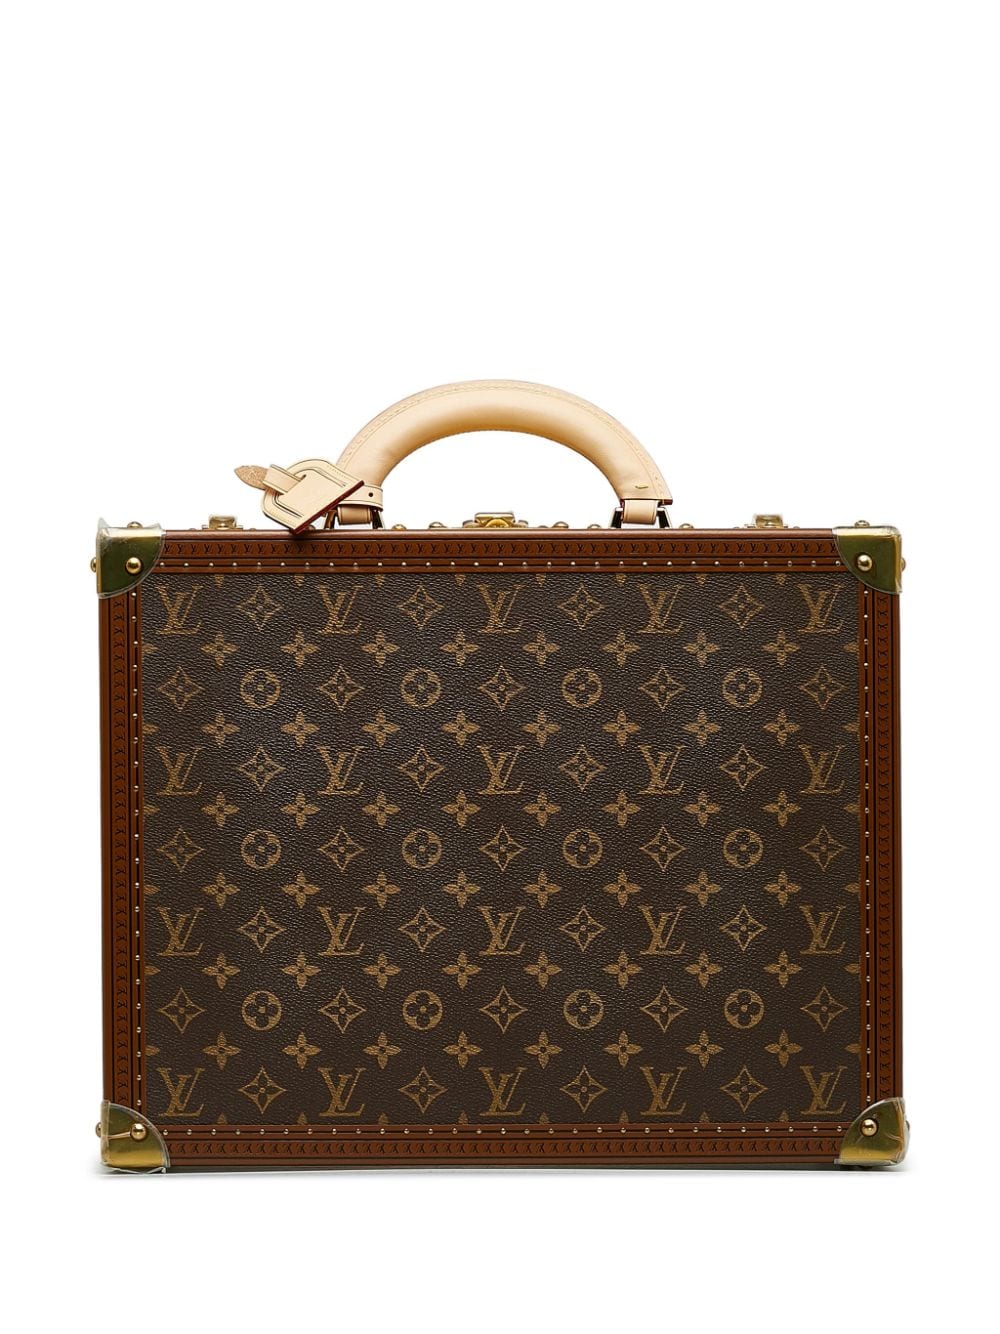 Louis Vuitton Pre-Owned pre-owned Cotteville Monogram 40 Travel Case ...